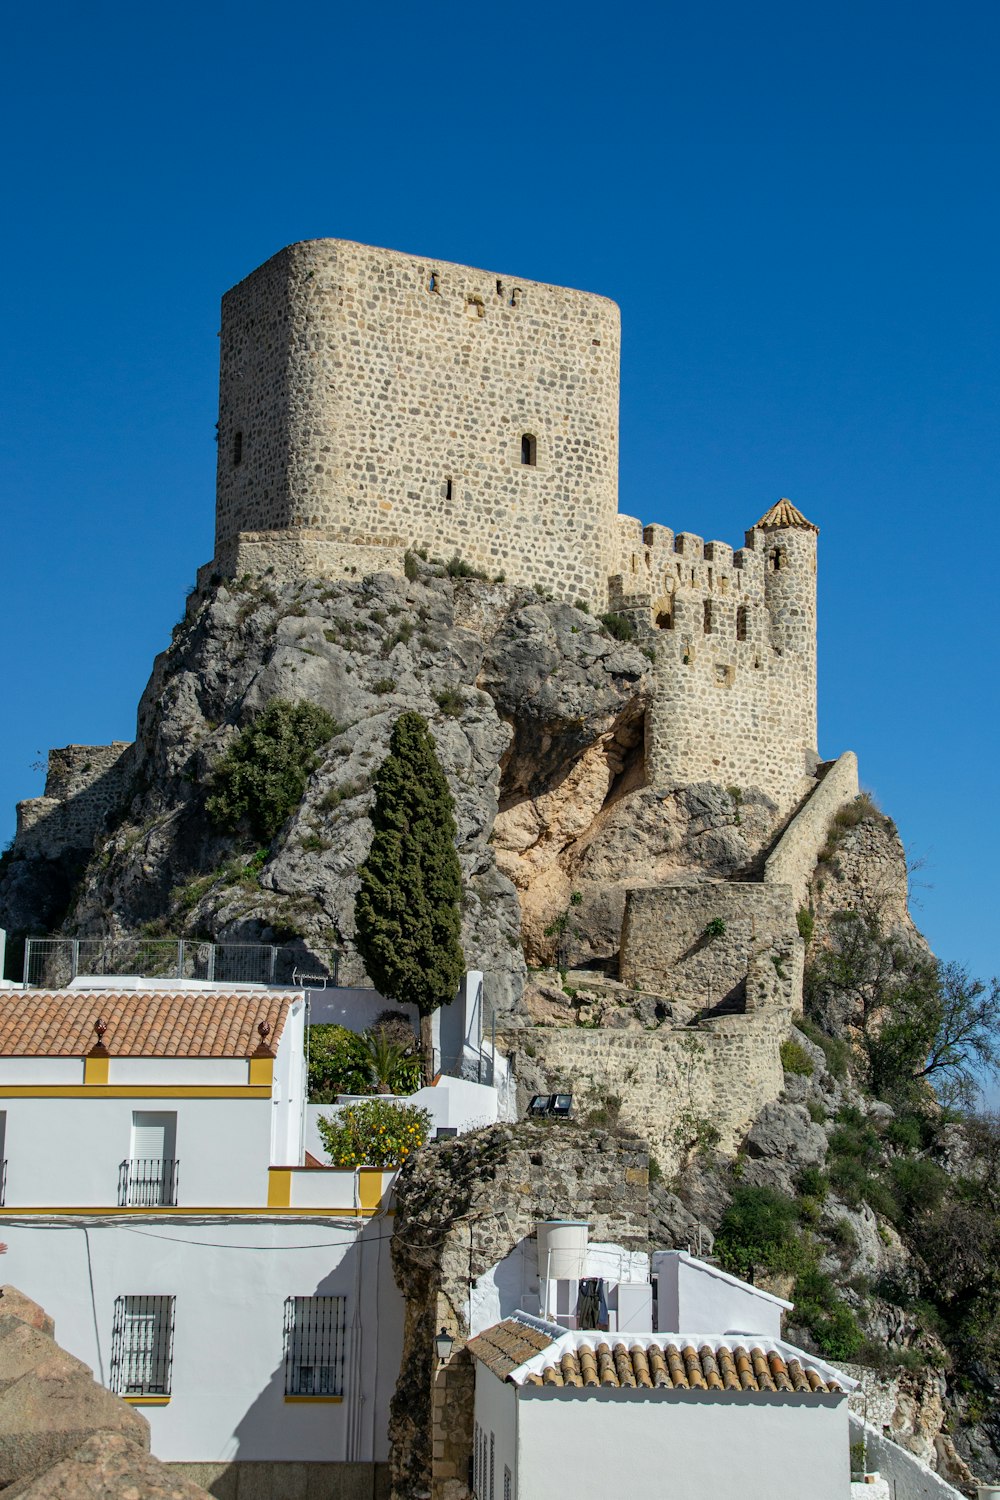 a castle on top of a hill with a blue sky in the background